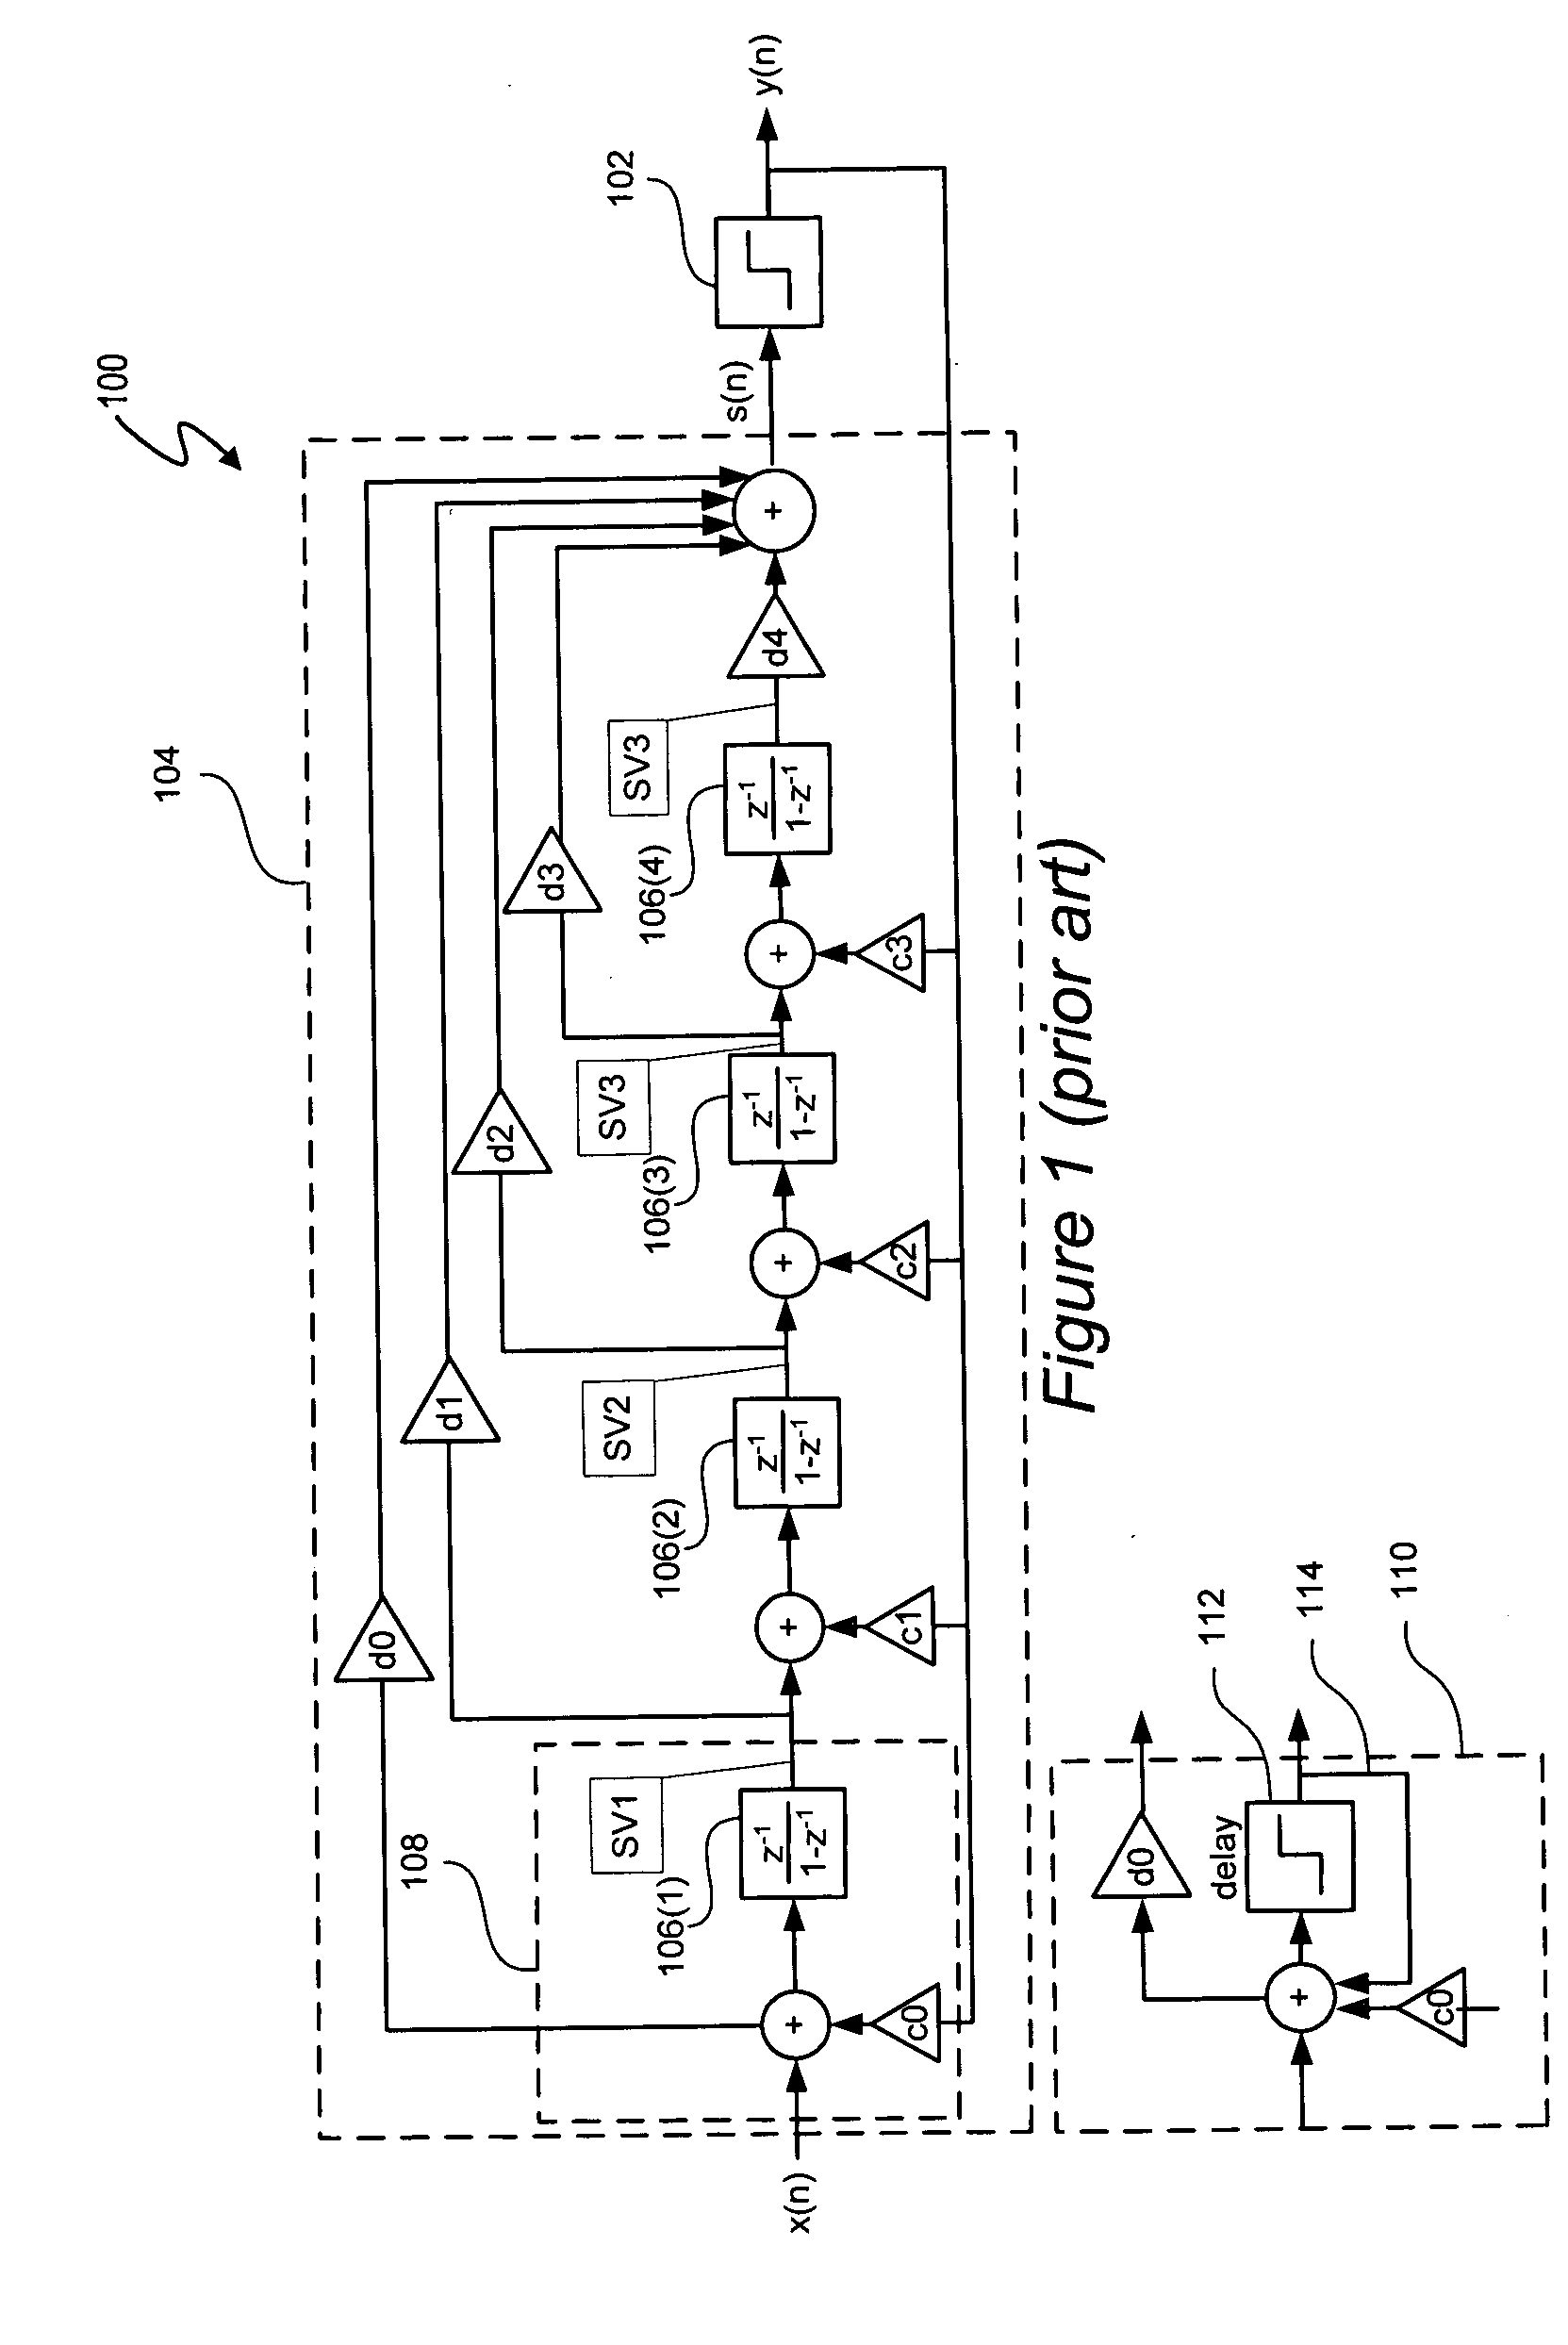 Jointly nonlinear delta sigma modulators